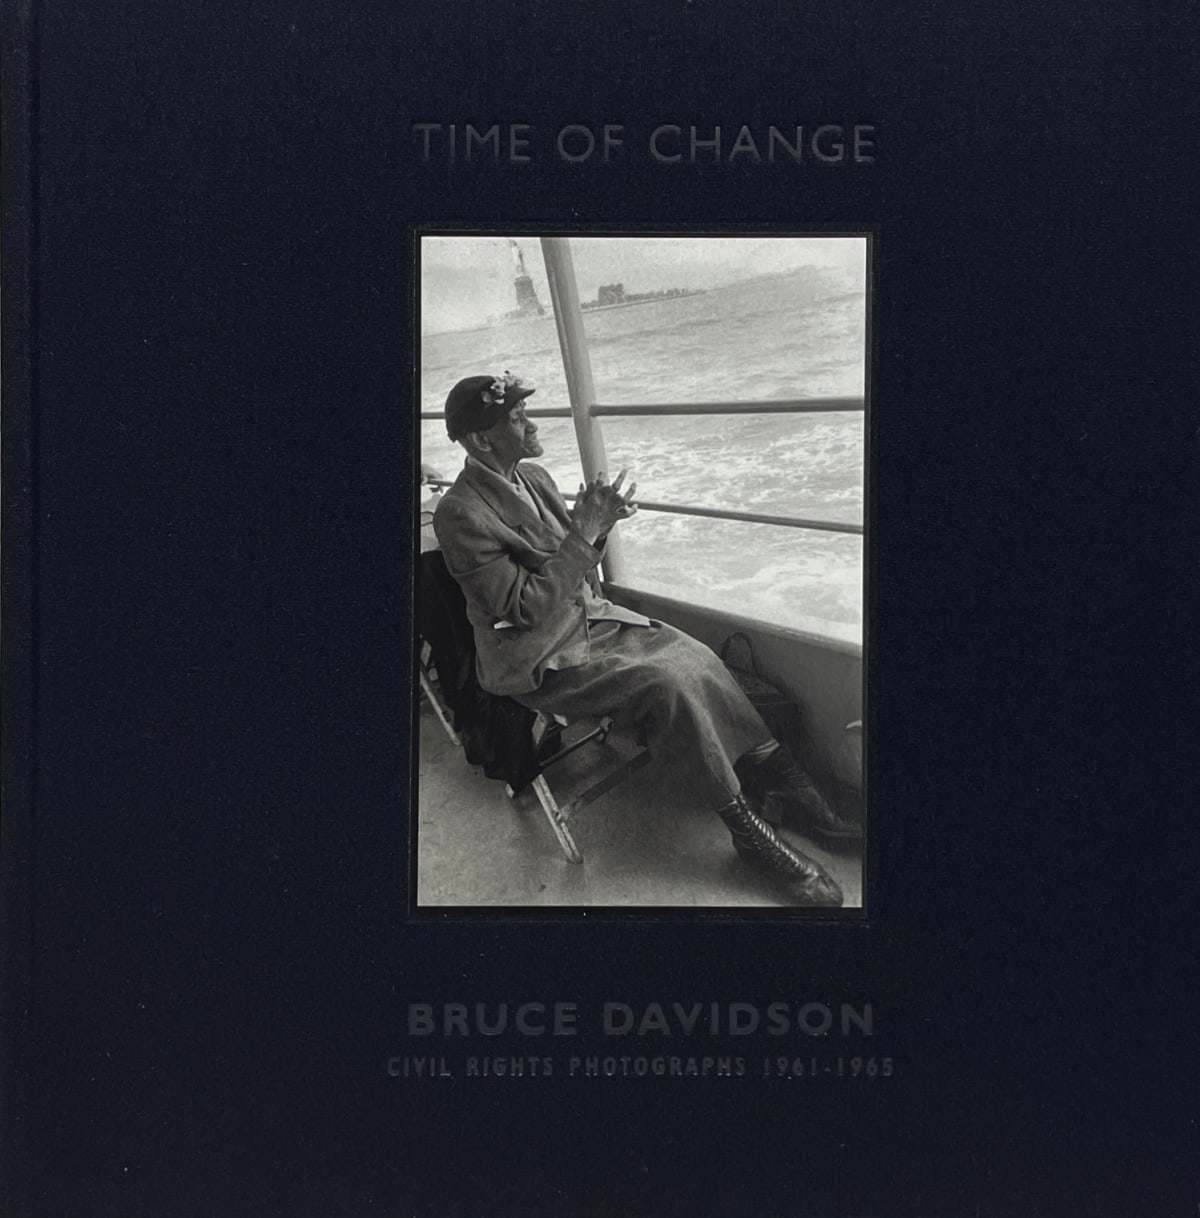 Publication: Time of Change: Civil Rights Photographs, 1961-1965 